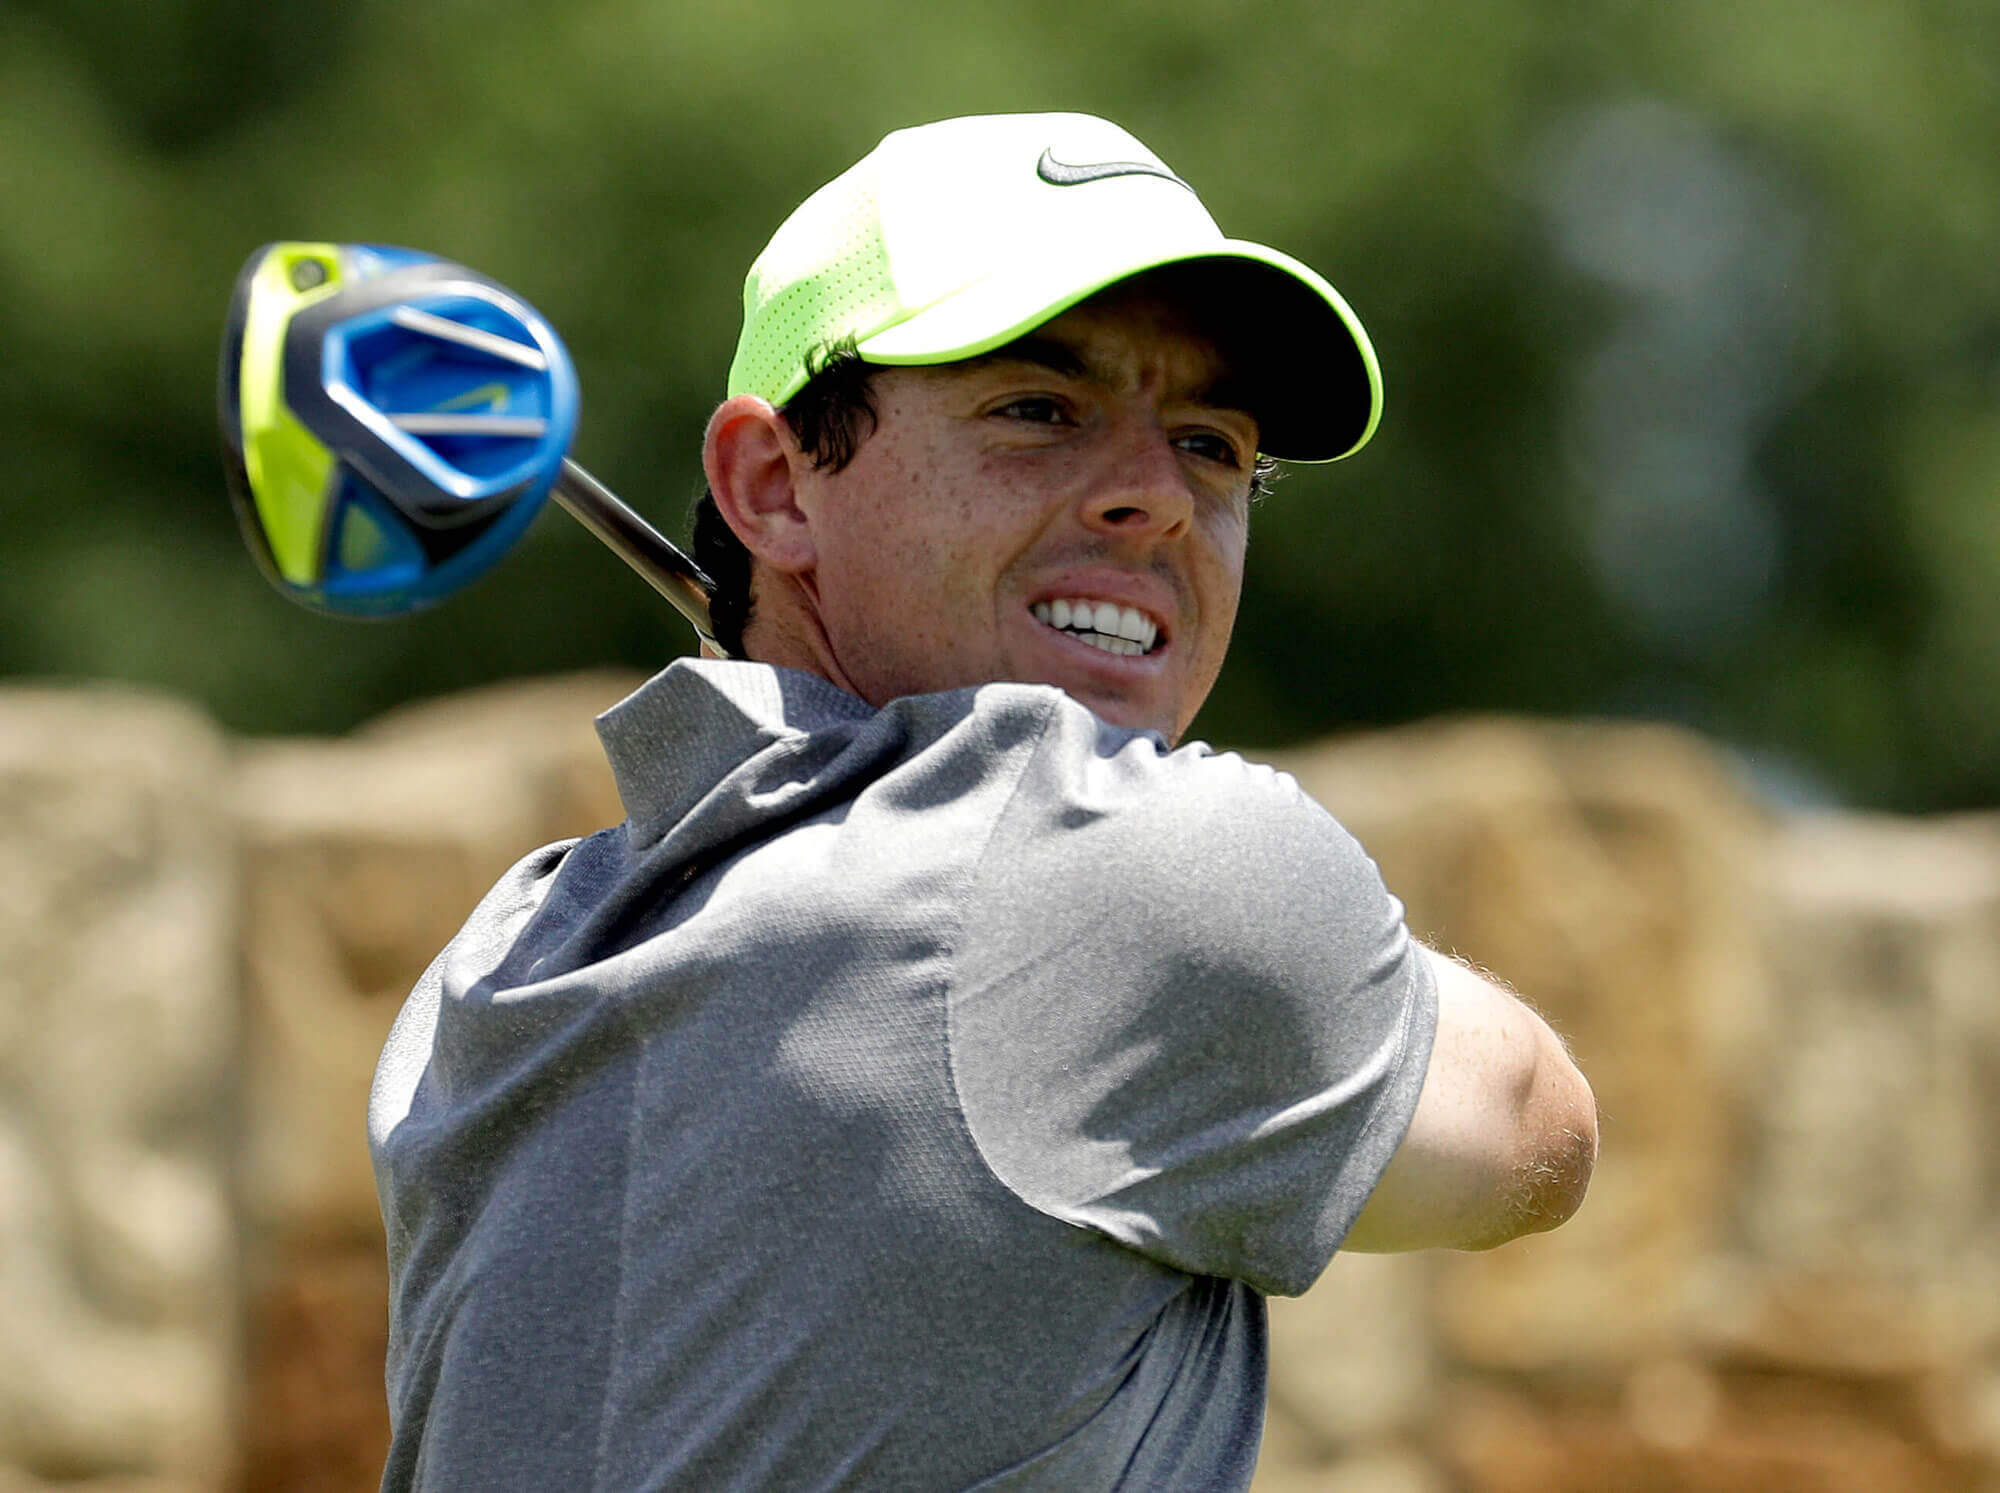 picture of Rory McIlroy swinging his golf club.